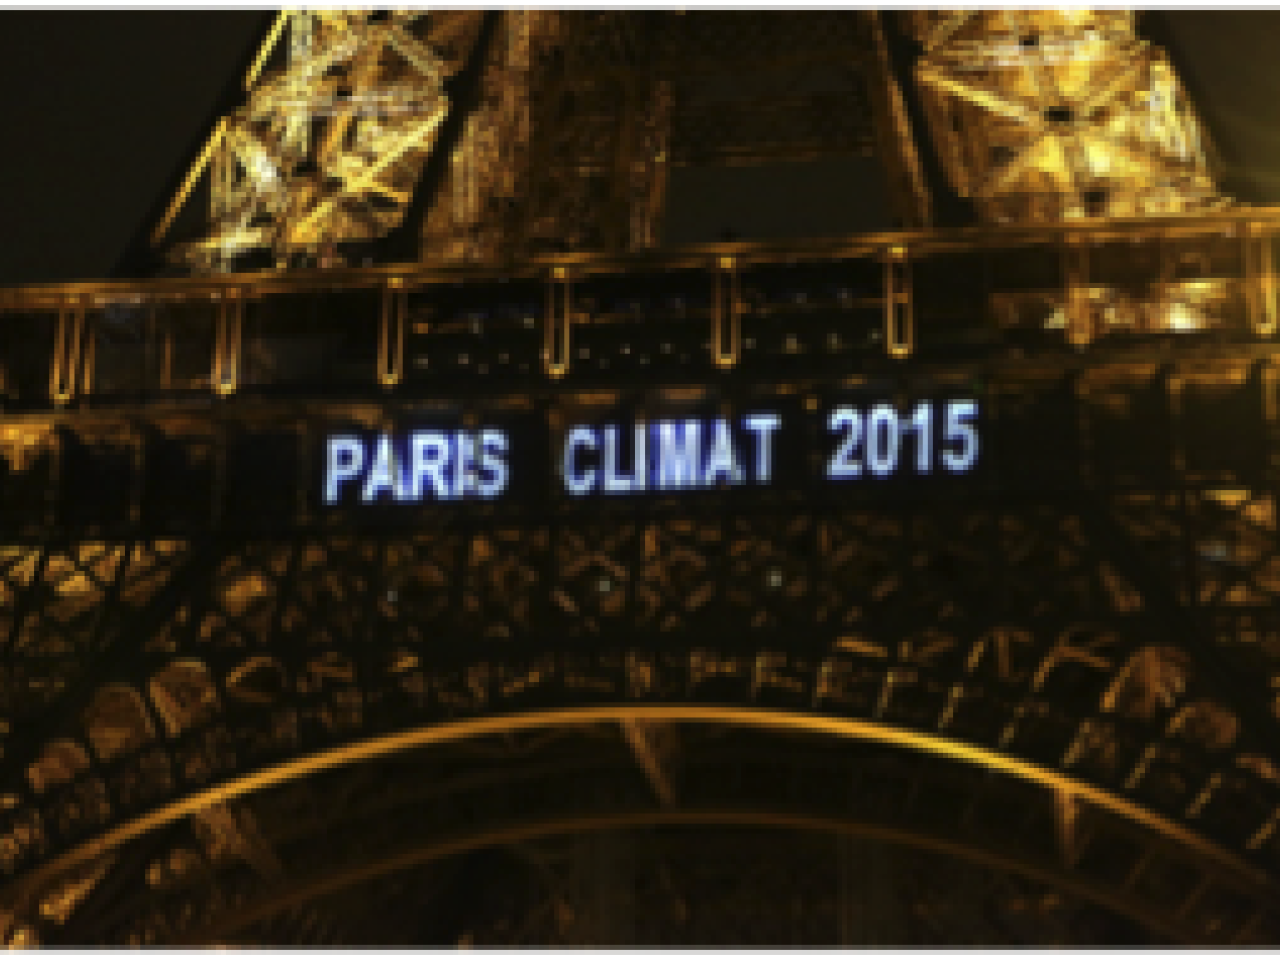 A close up image of the Eiffel tower at night with the words “Paris Climat 2015” projected in white letters on it.